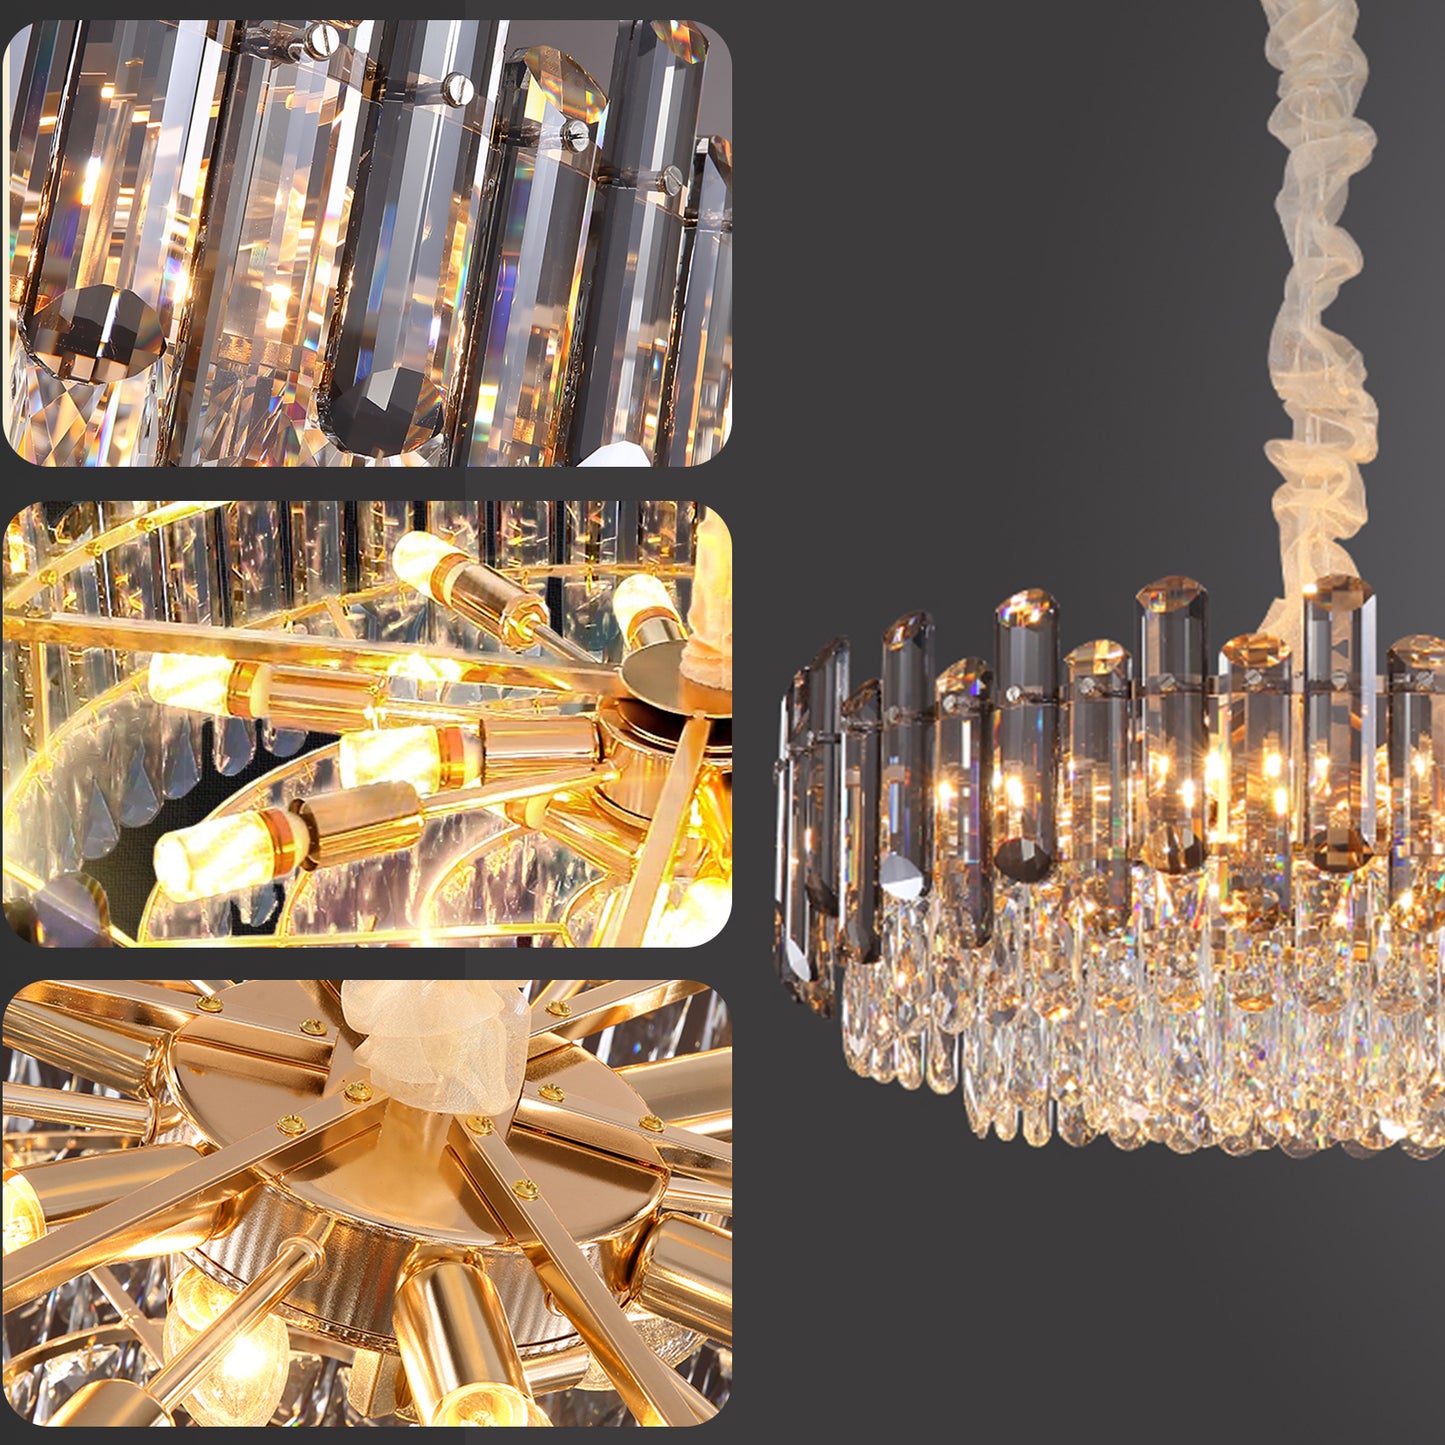 Shining Crystal Chandelier Ceiling Lamp